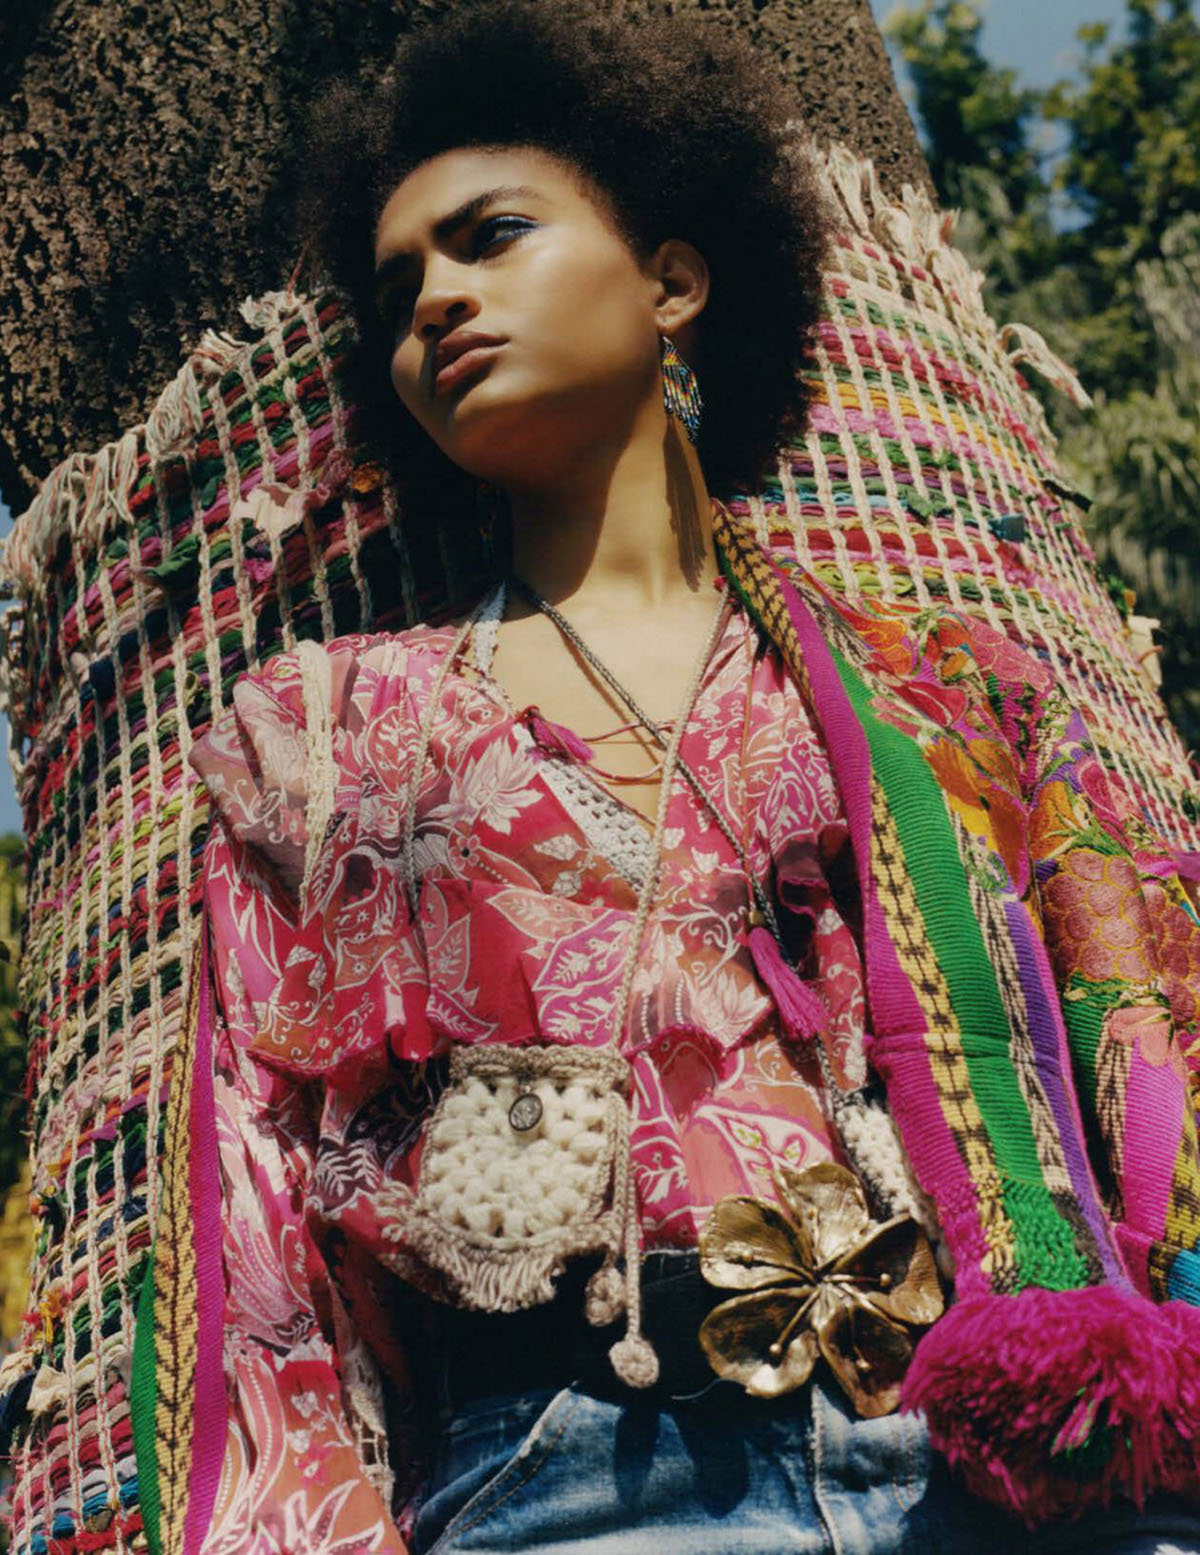 Anyelina Rosa by Peter Ash Lee for Vogue Mexico & Latin America July 2021